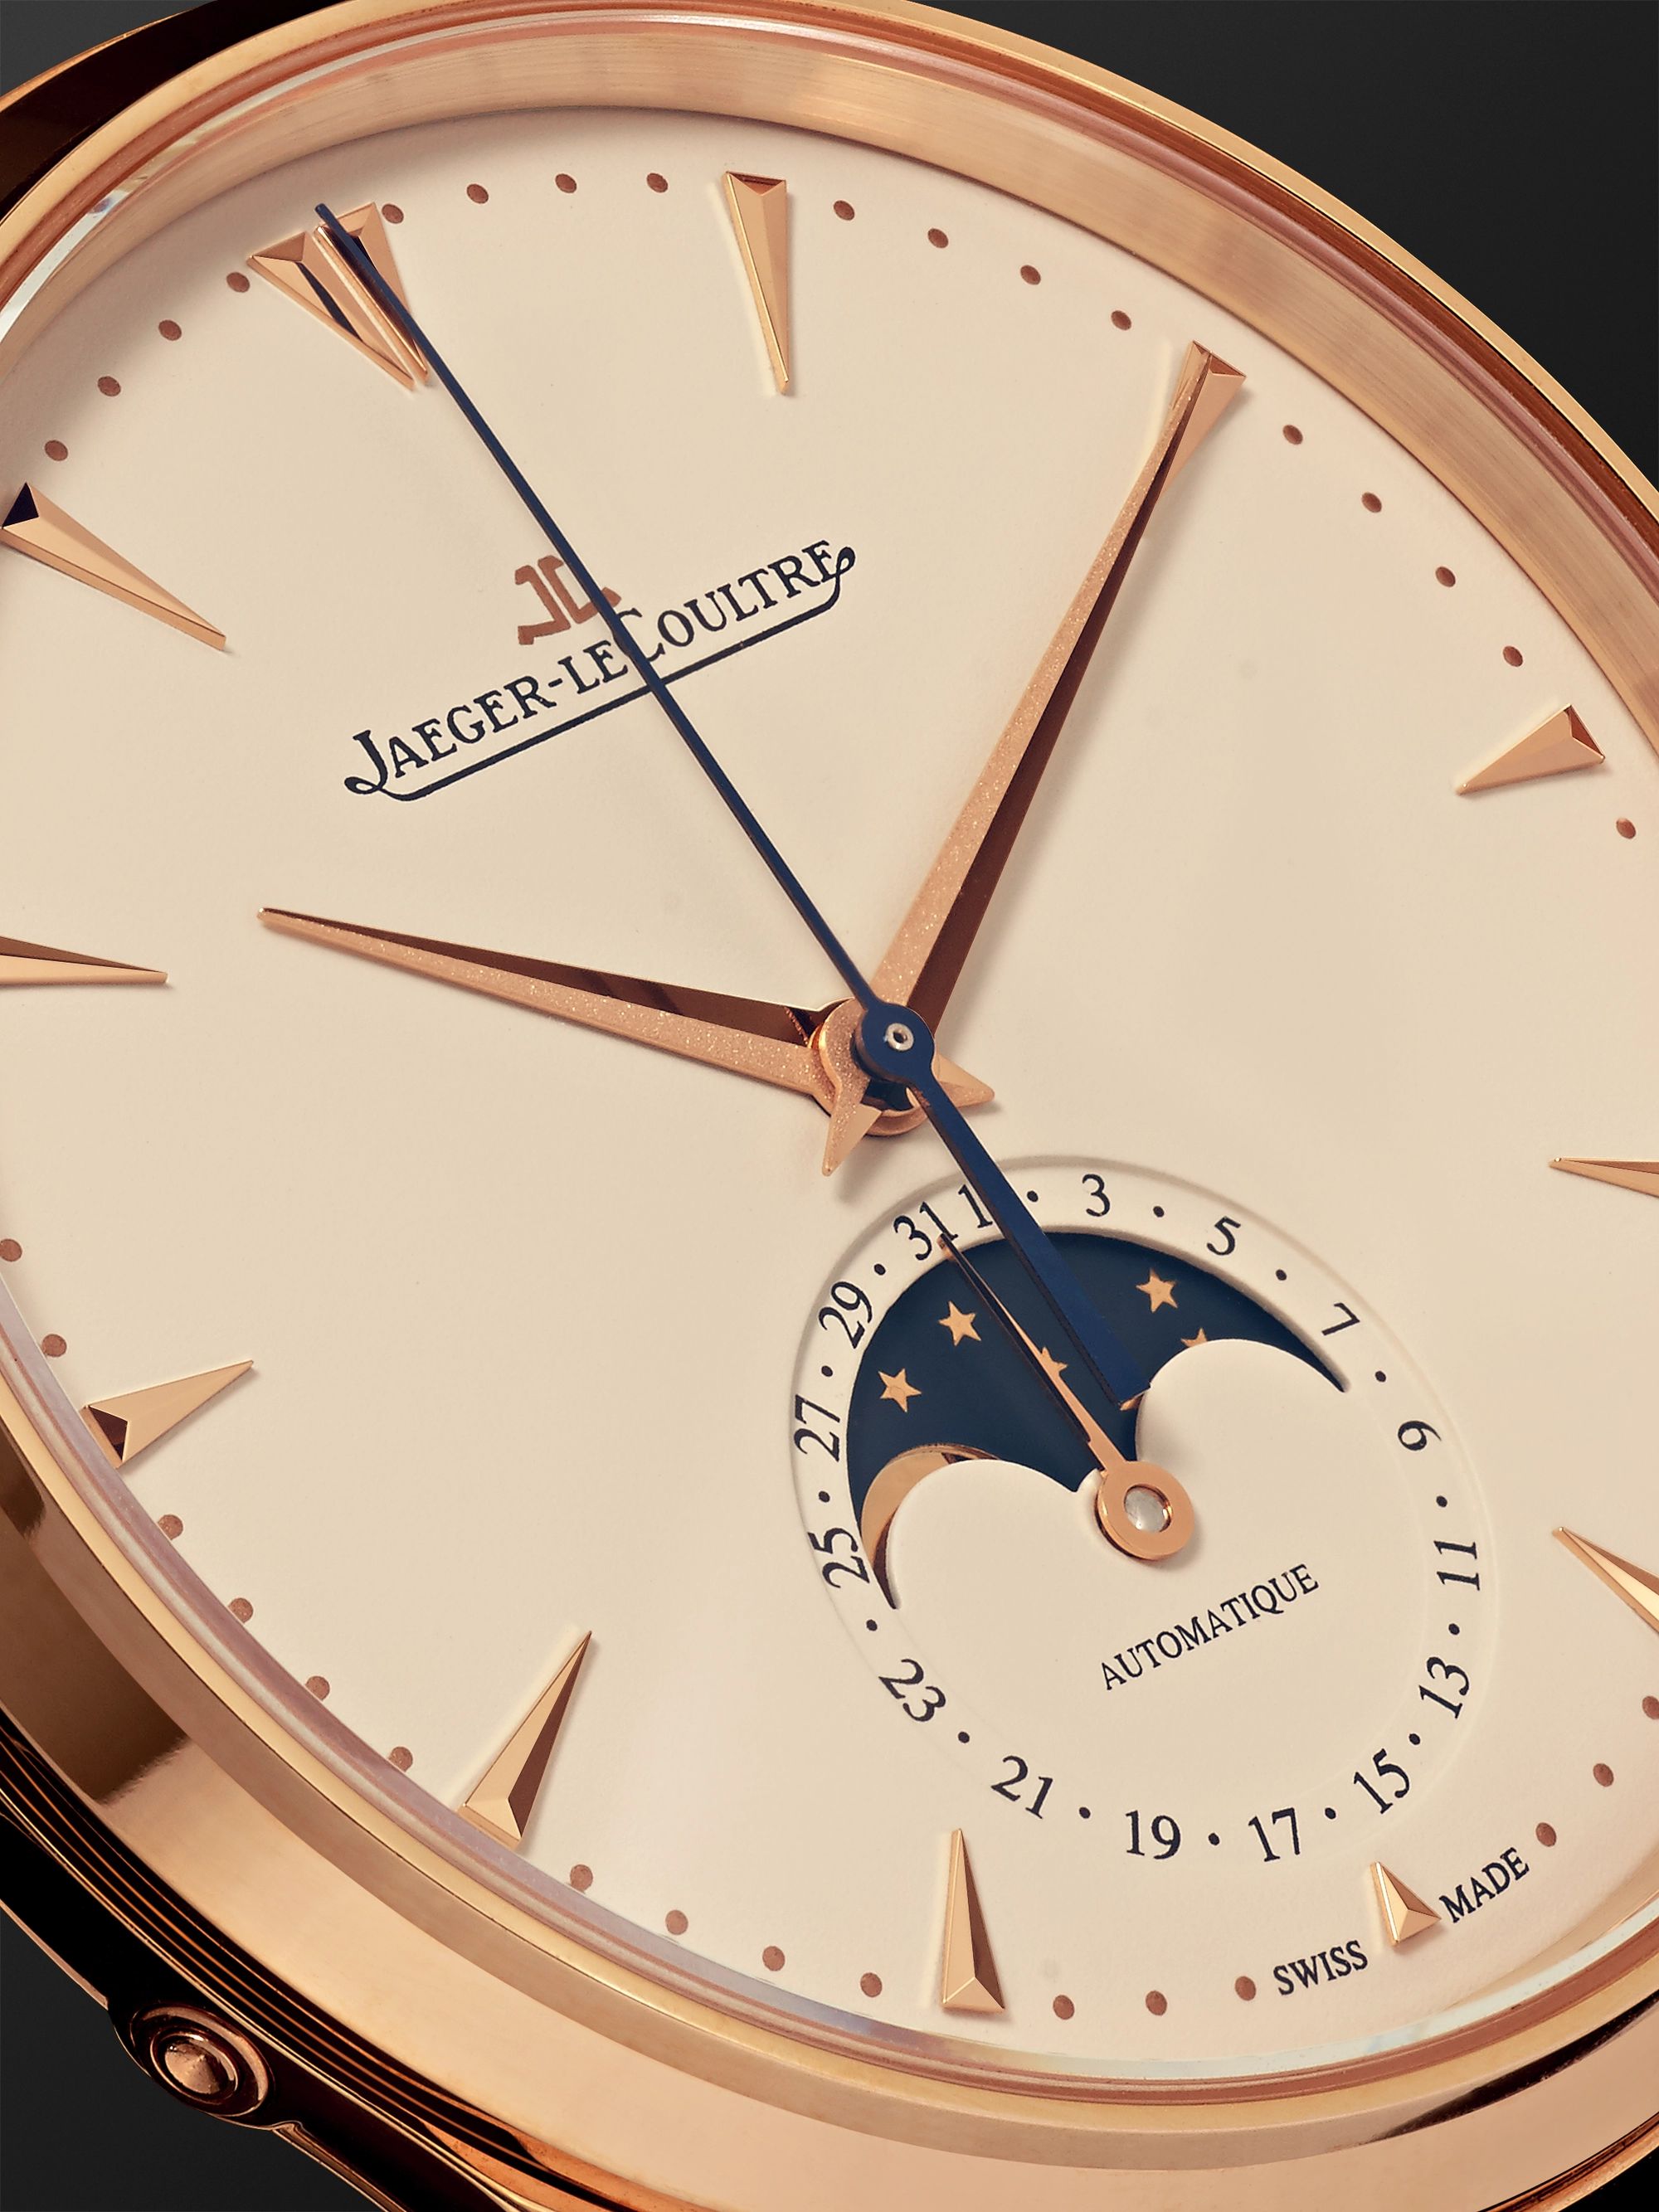 JAEGER-LECOULTRE Master Ultra Thin Moon Automatic 39mm 18-Karat Rose Gold and Alligator Watch